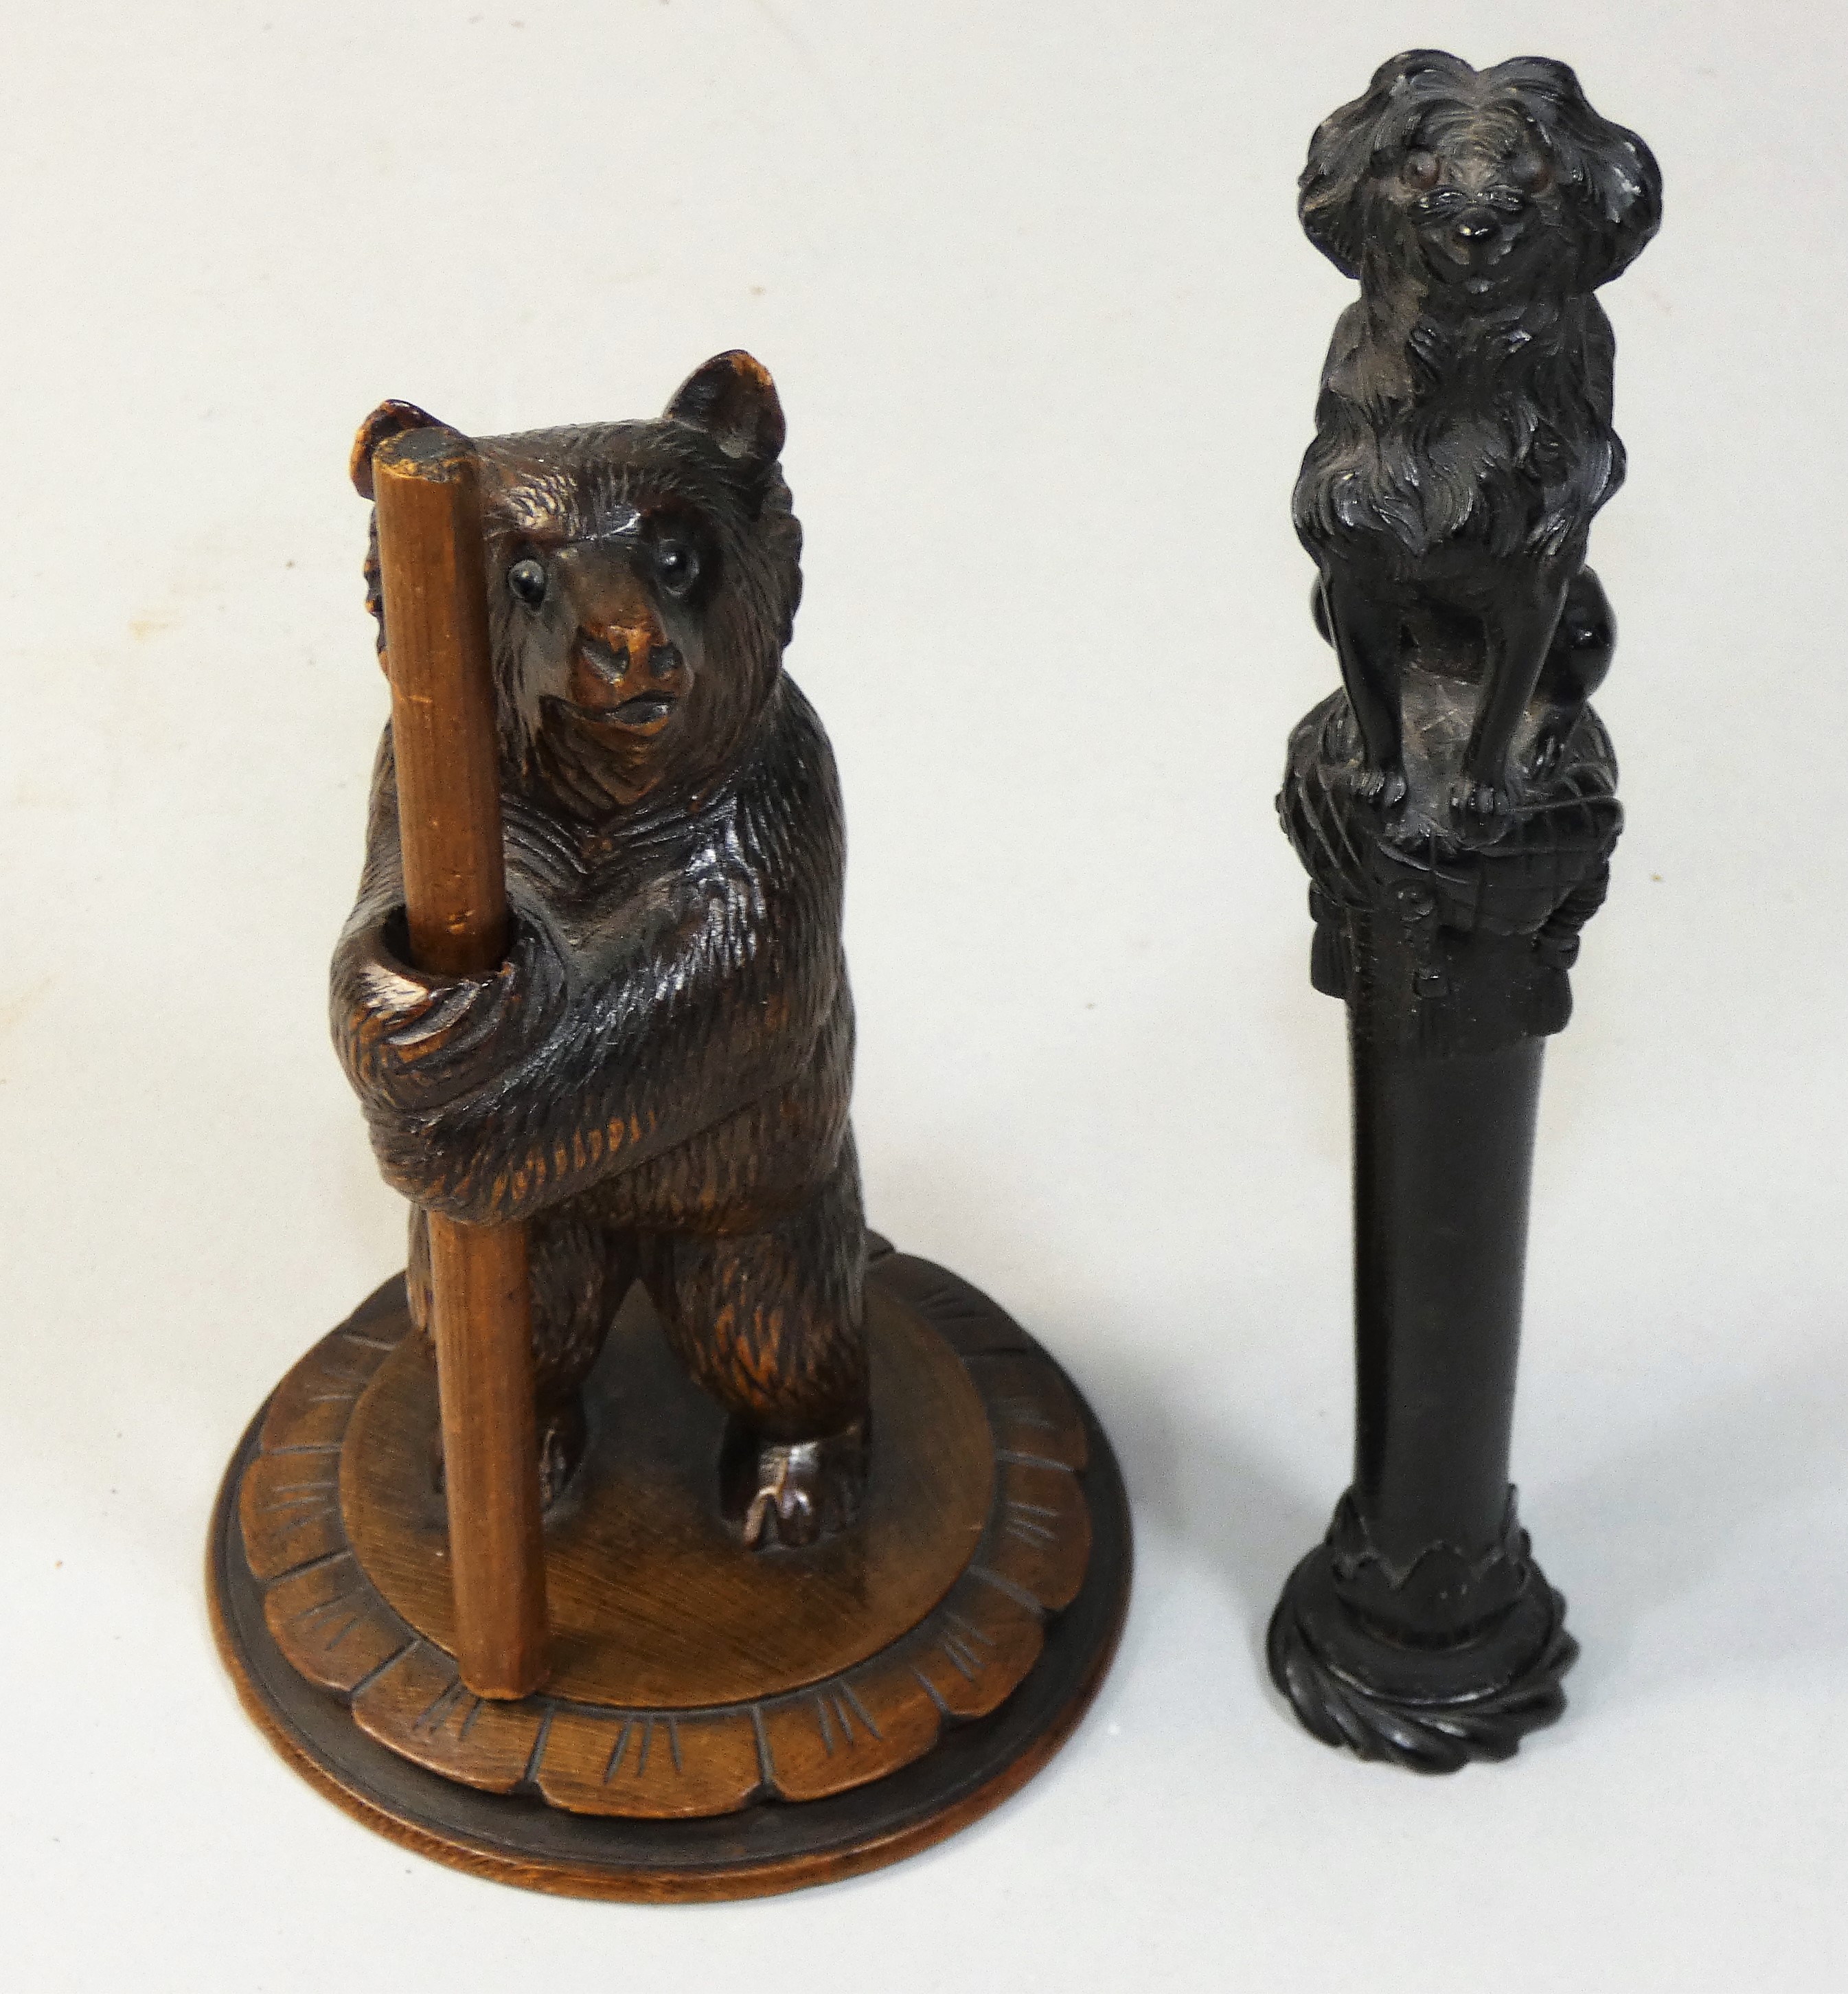 A 19th century French ebonised handle, carved in the form of a King Charles Spaniel upon a